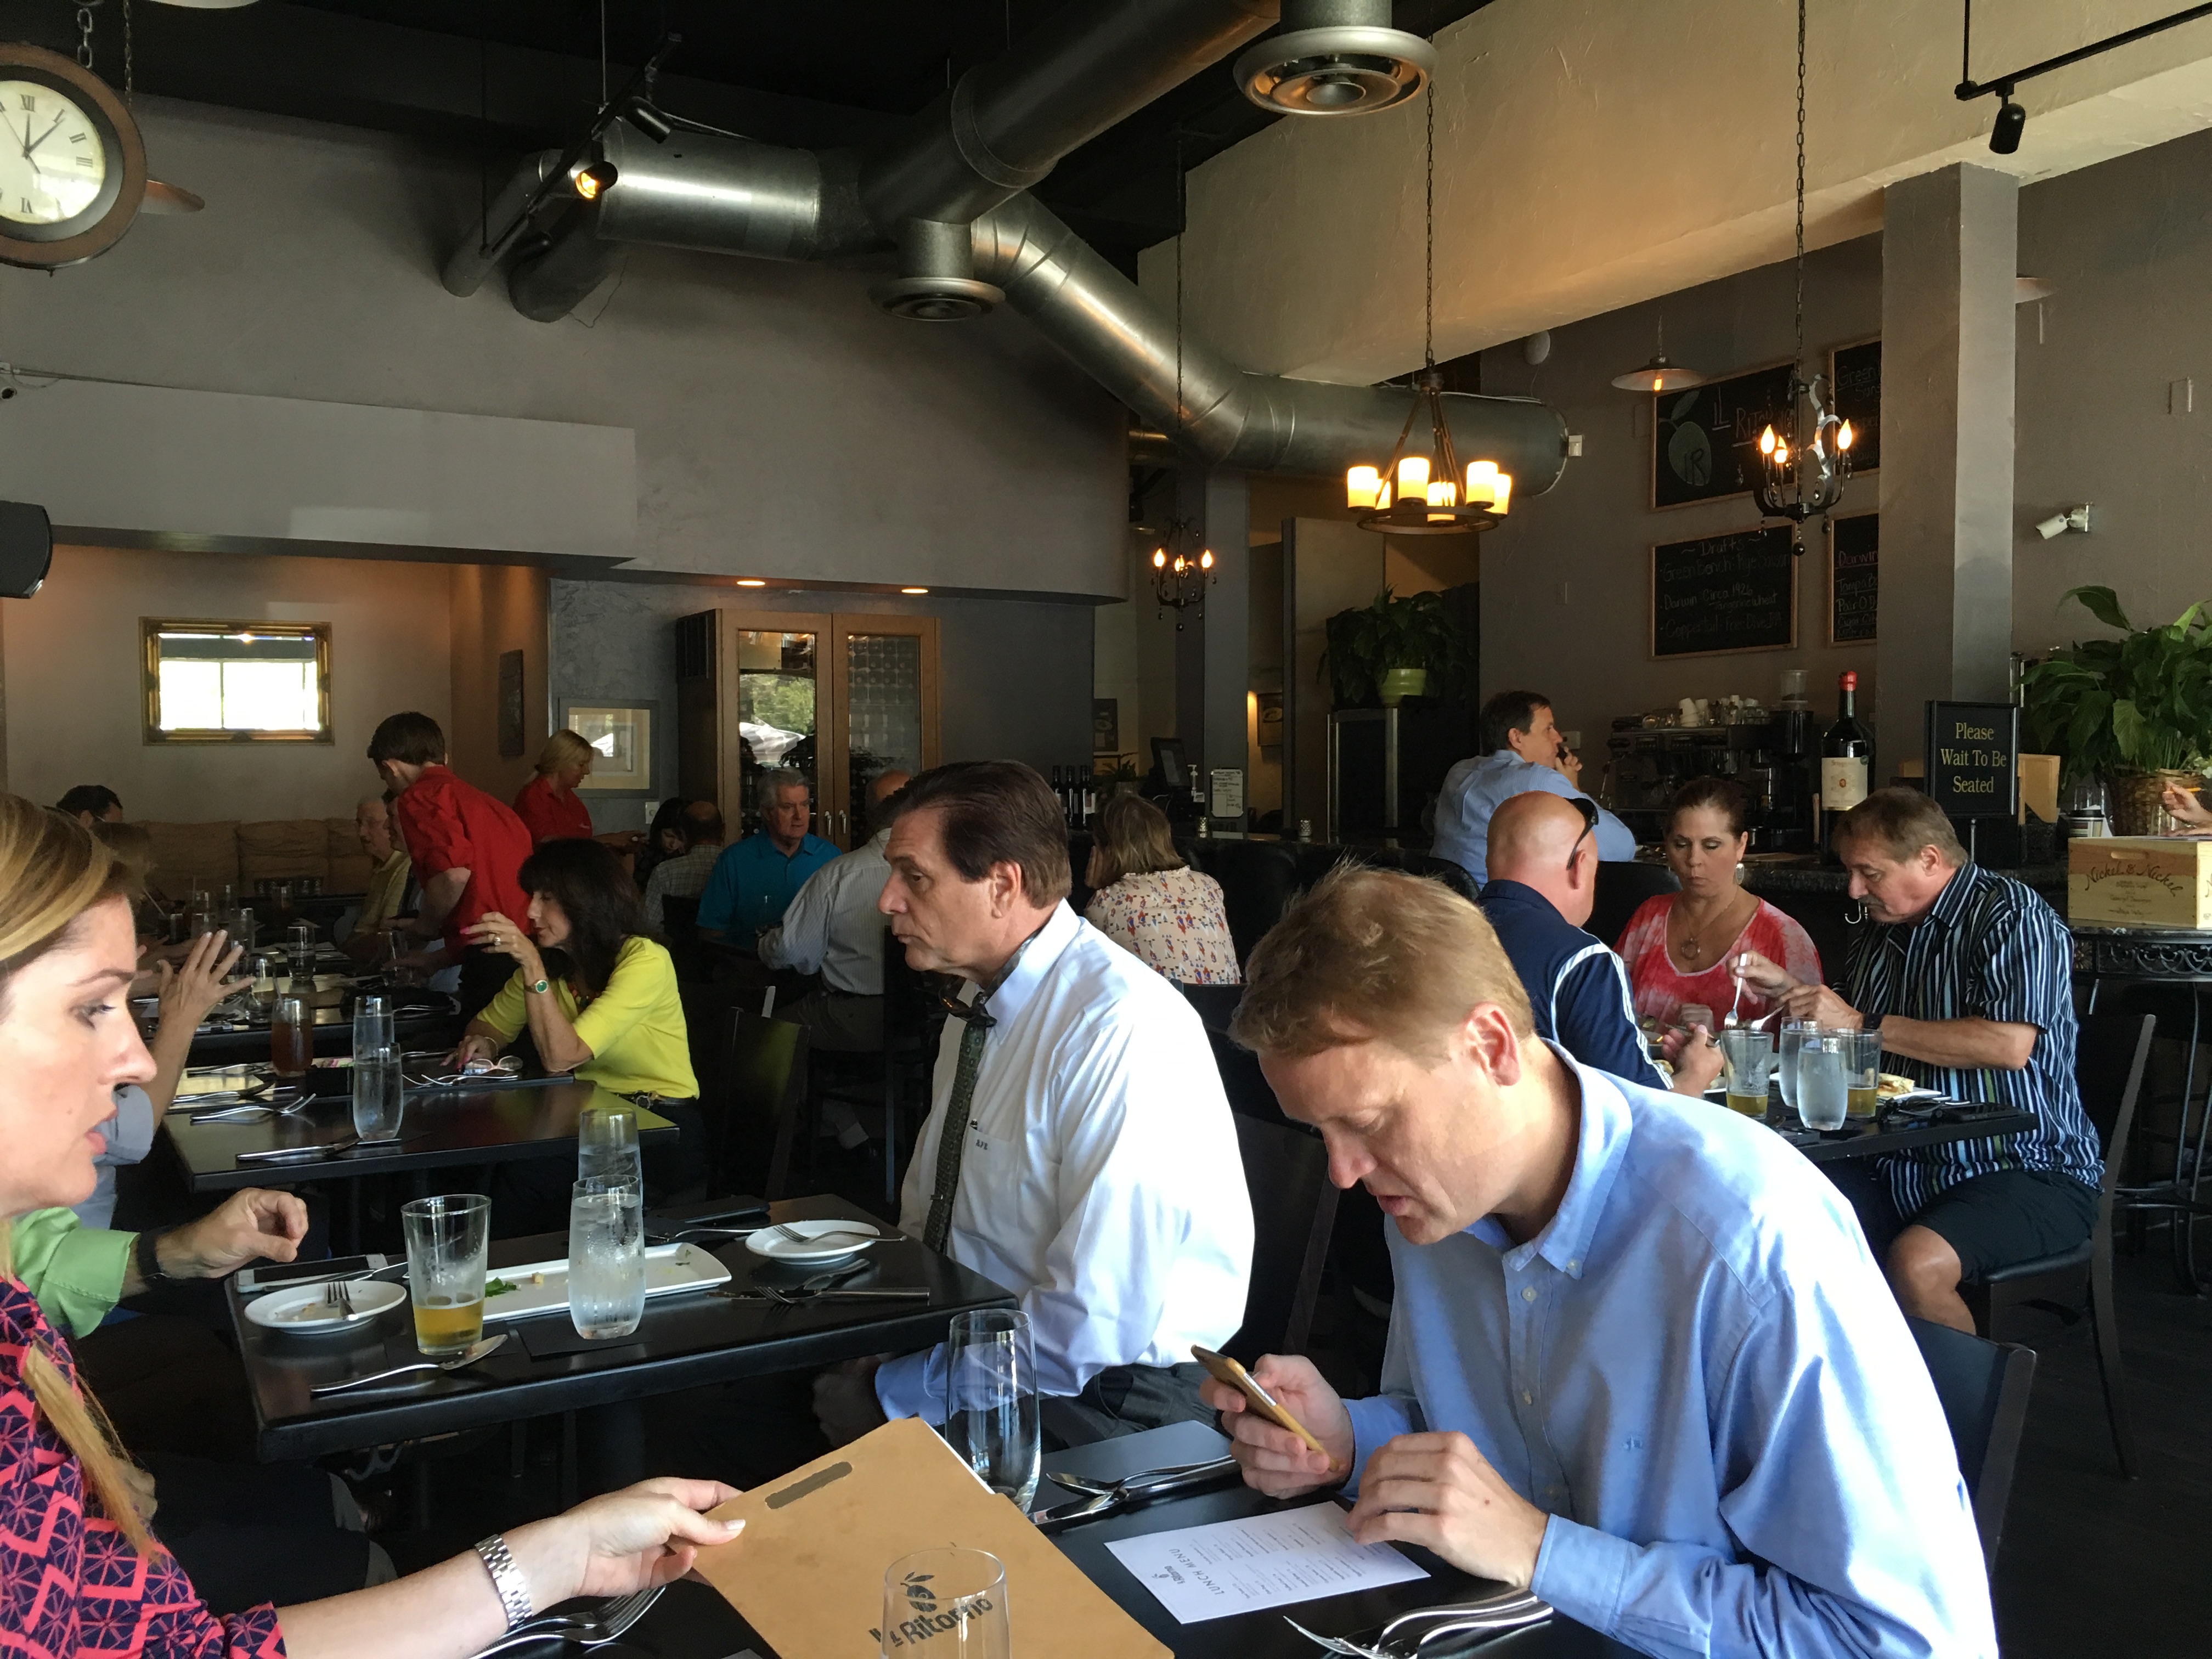 A packed house for lunch at IL Ritorno